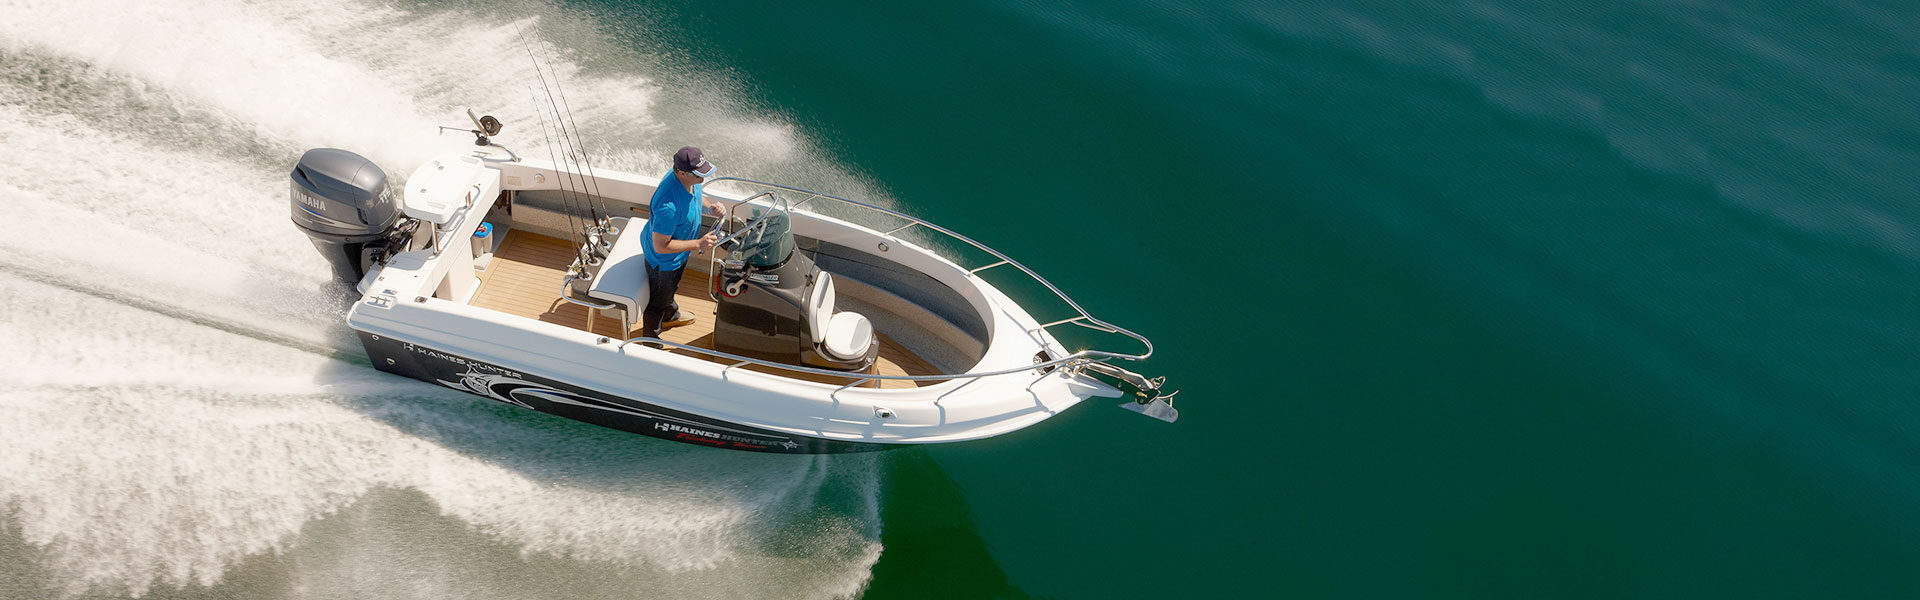 Trailer Boat Tests Haines Hunter 675 Offshore Hard Top